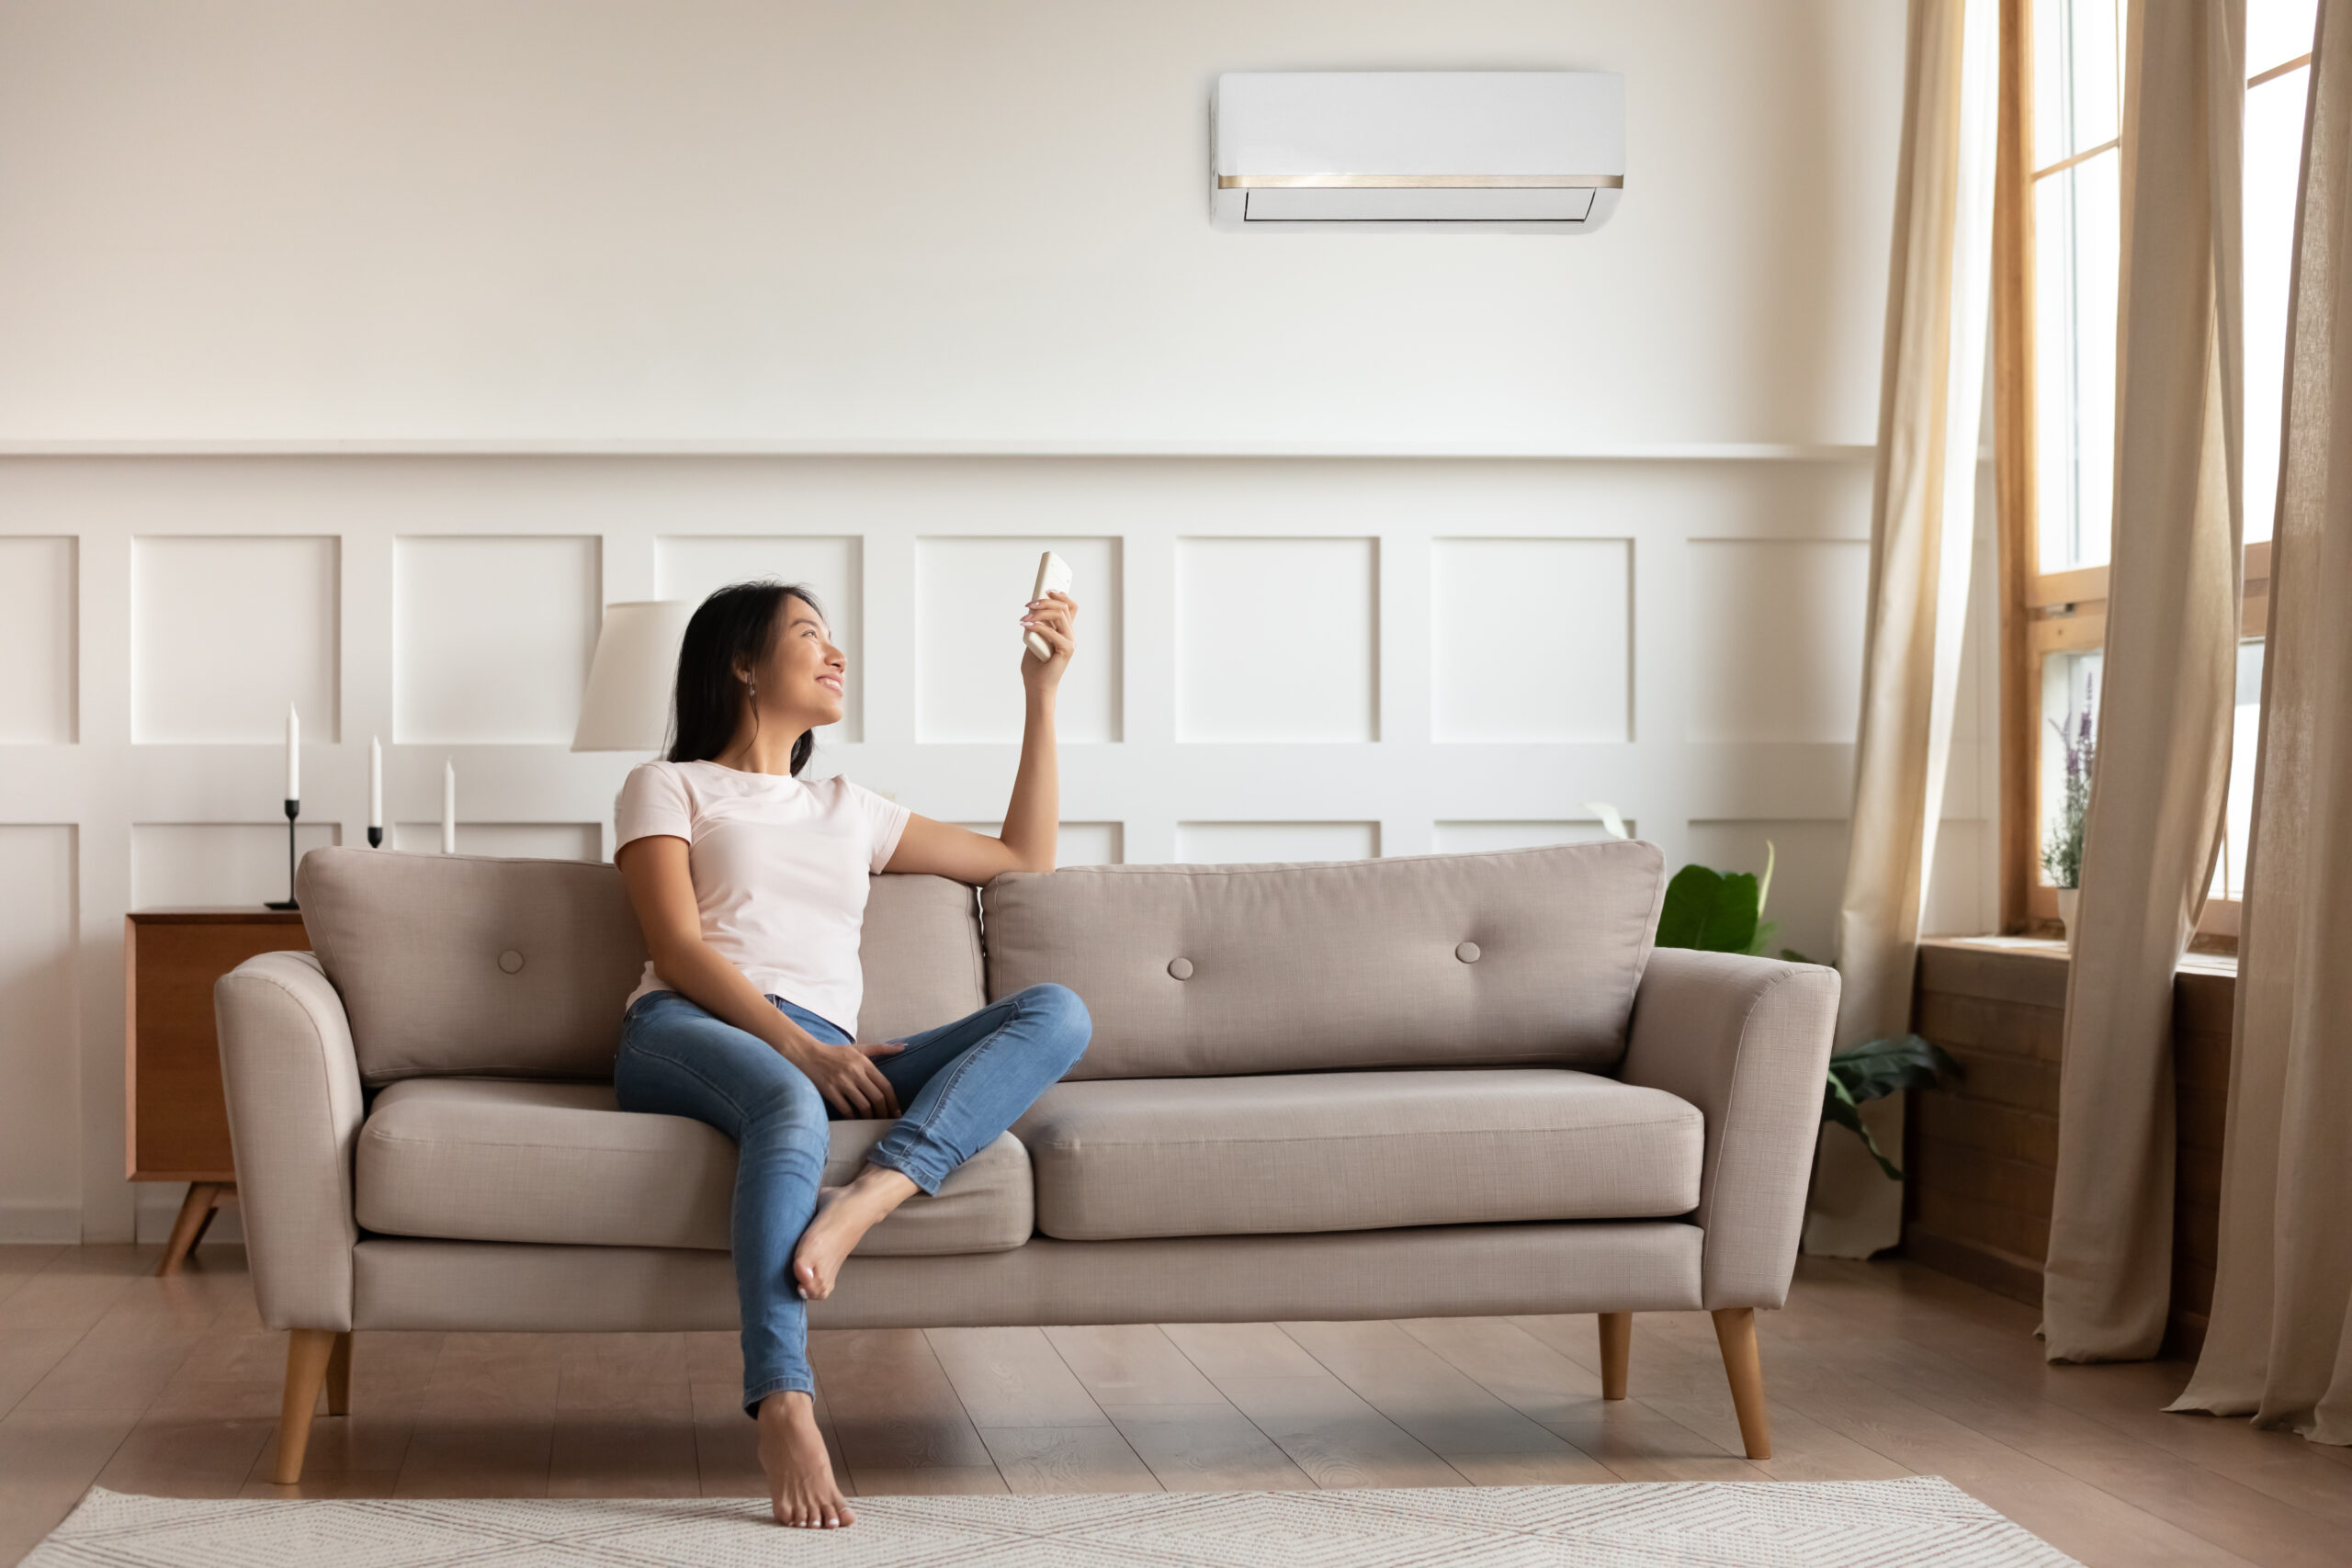 Need A New Air Conditioner? Spring Into Action And Beat The Rush